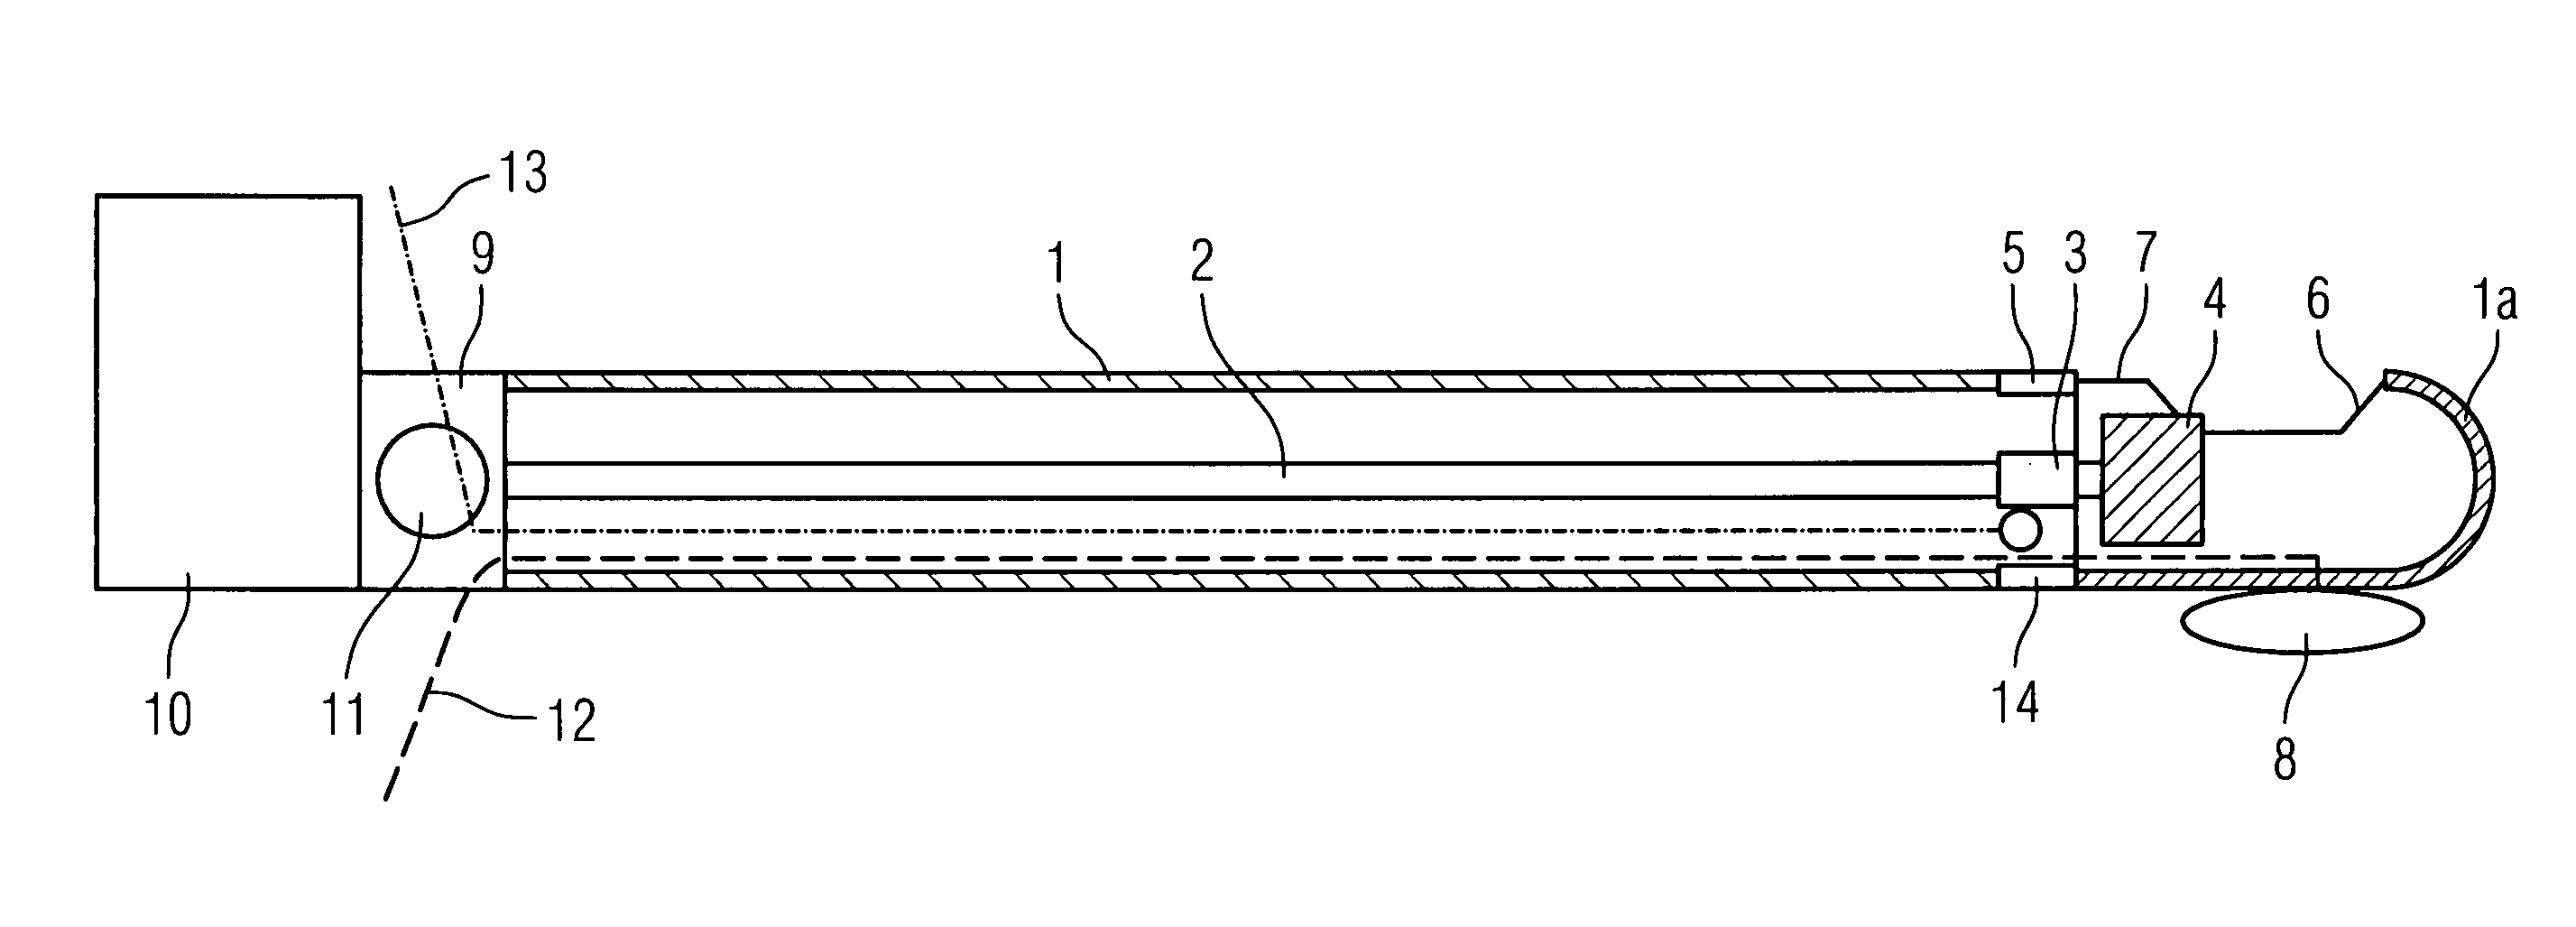 Device for applying and monitoring medical atherectomy